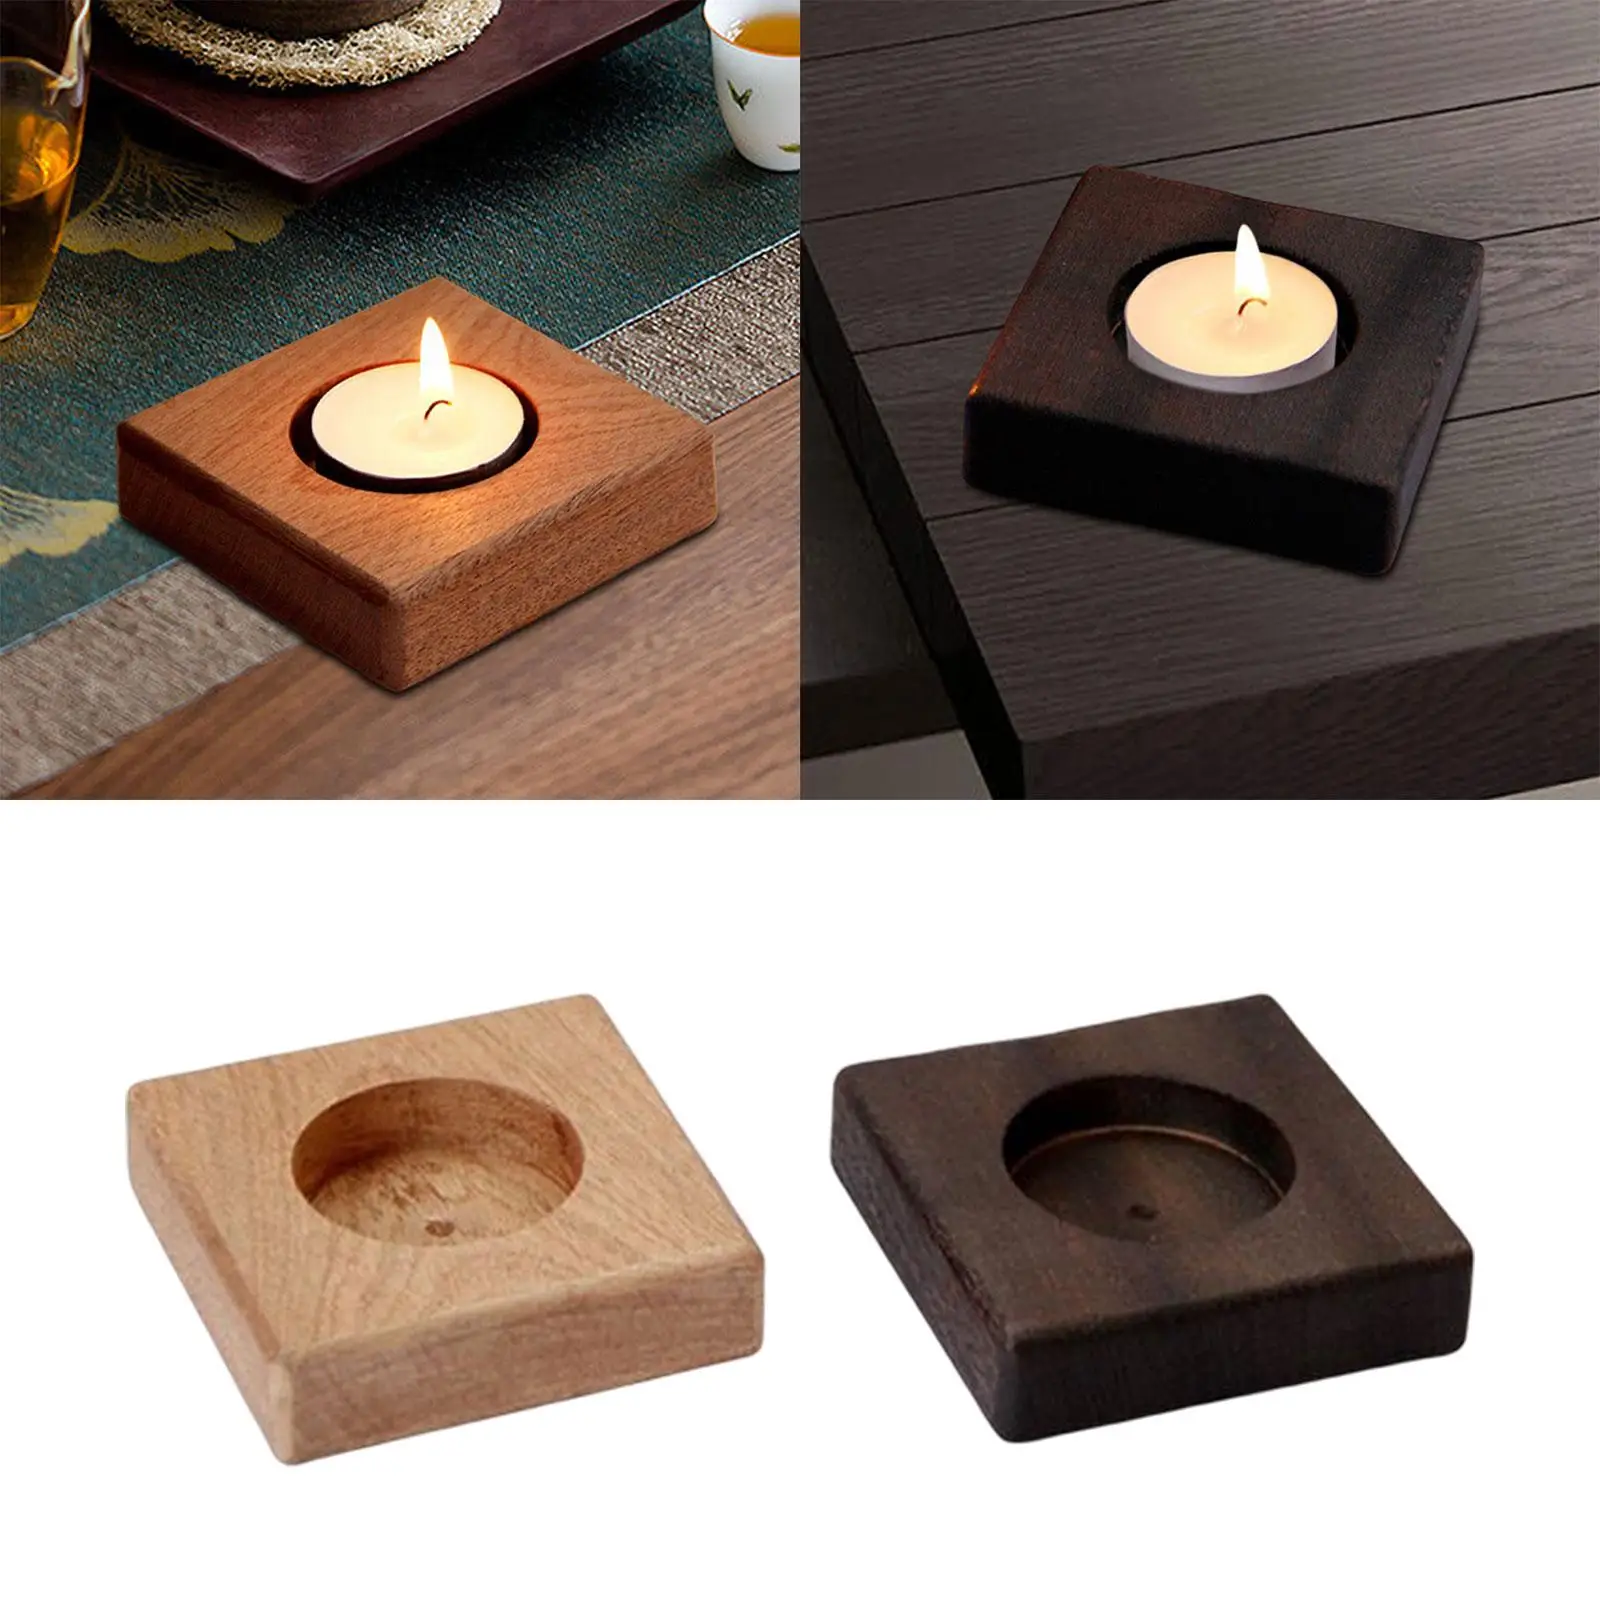 Wooden Candle Holder, Tealight Holders, Votive Candle Holders, Decorative Candleholder for Wedding Holiday Birthday Decoration